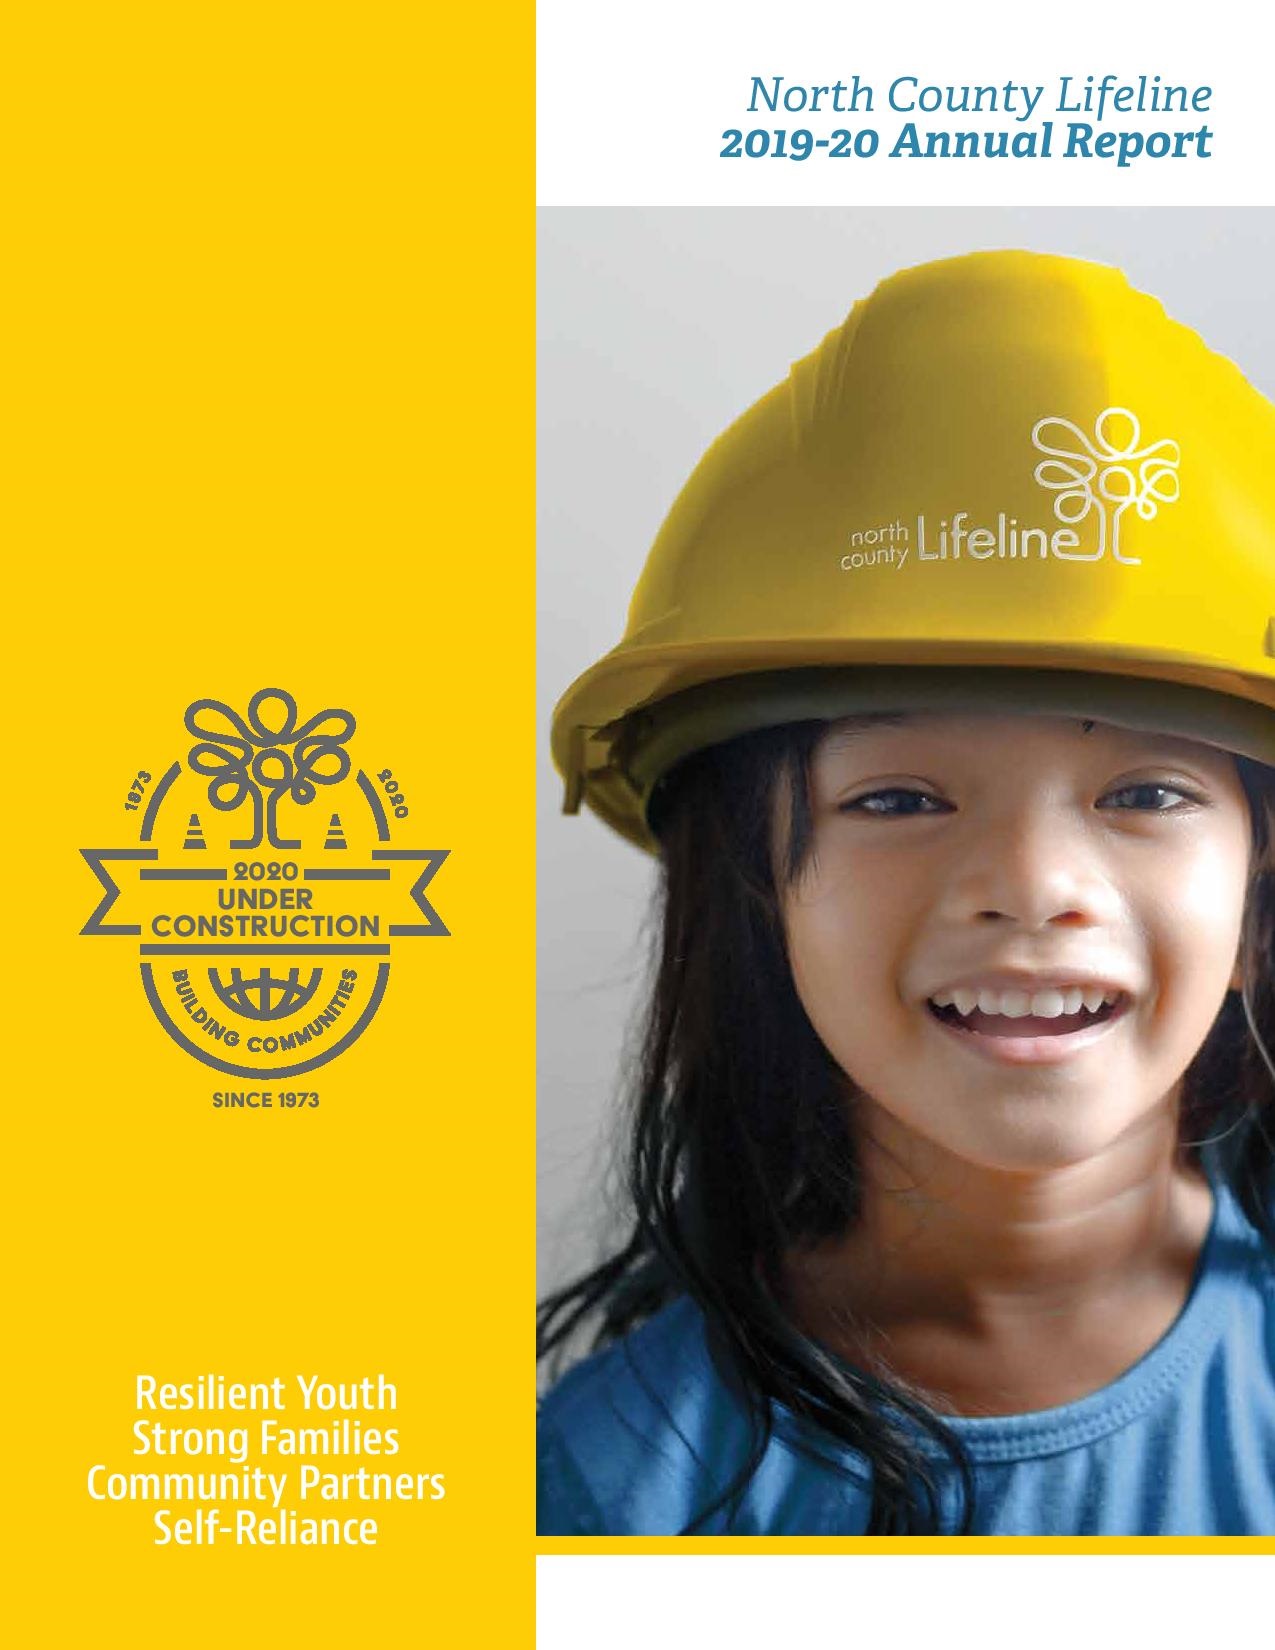 2020 Annual Report Cover.jpg